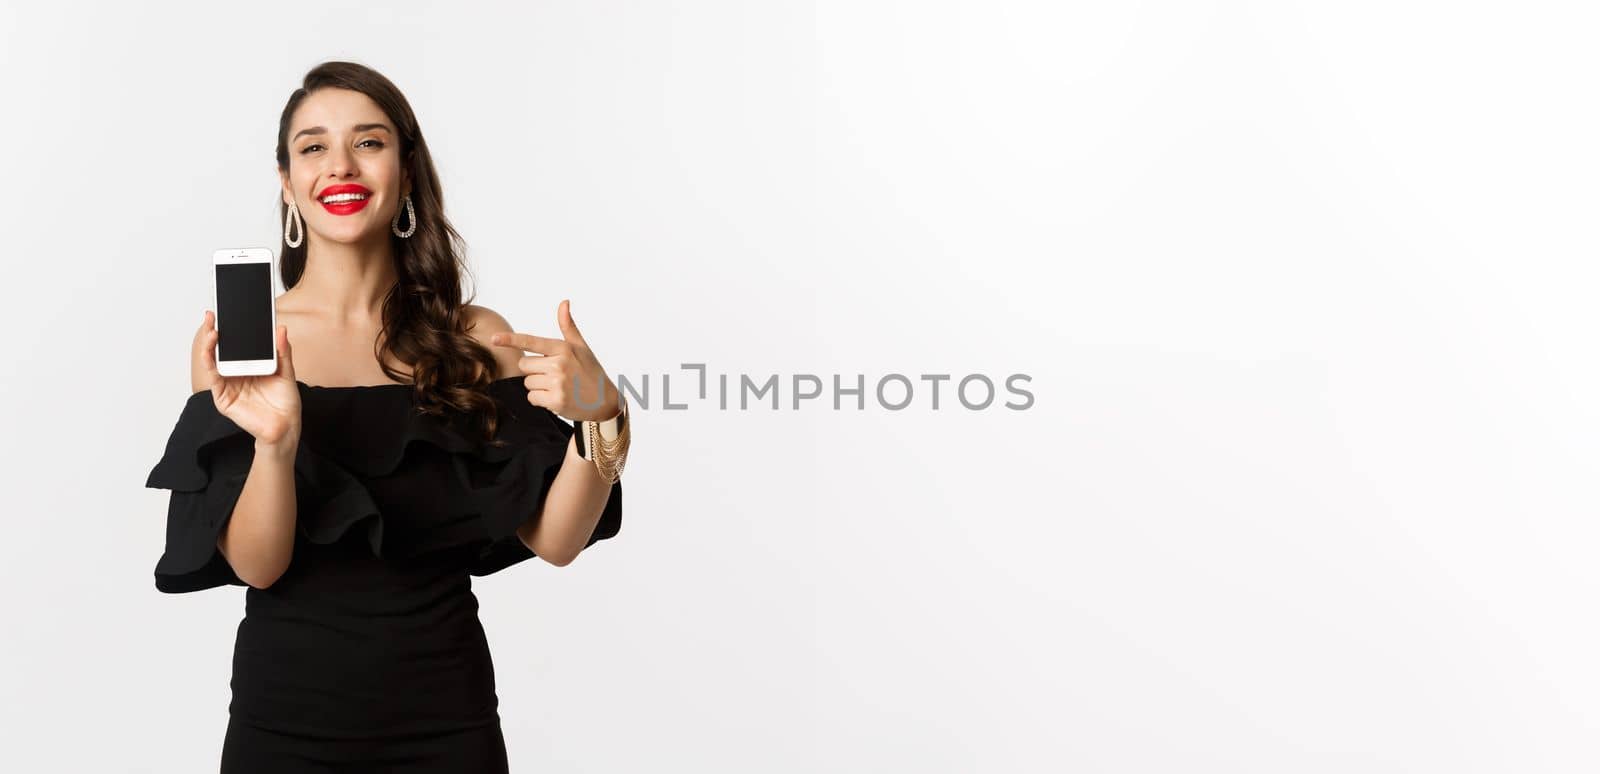 Online shopping concept. Fashionable woman in black dress pointing finger at smartphone screen, showing application, standing over white background.